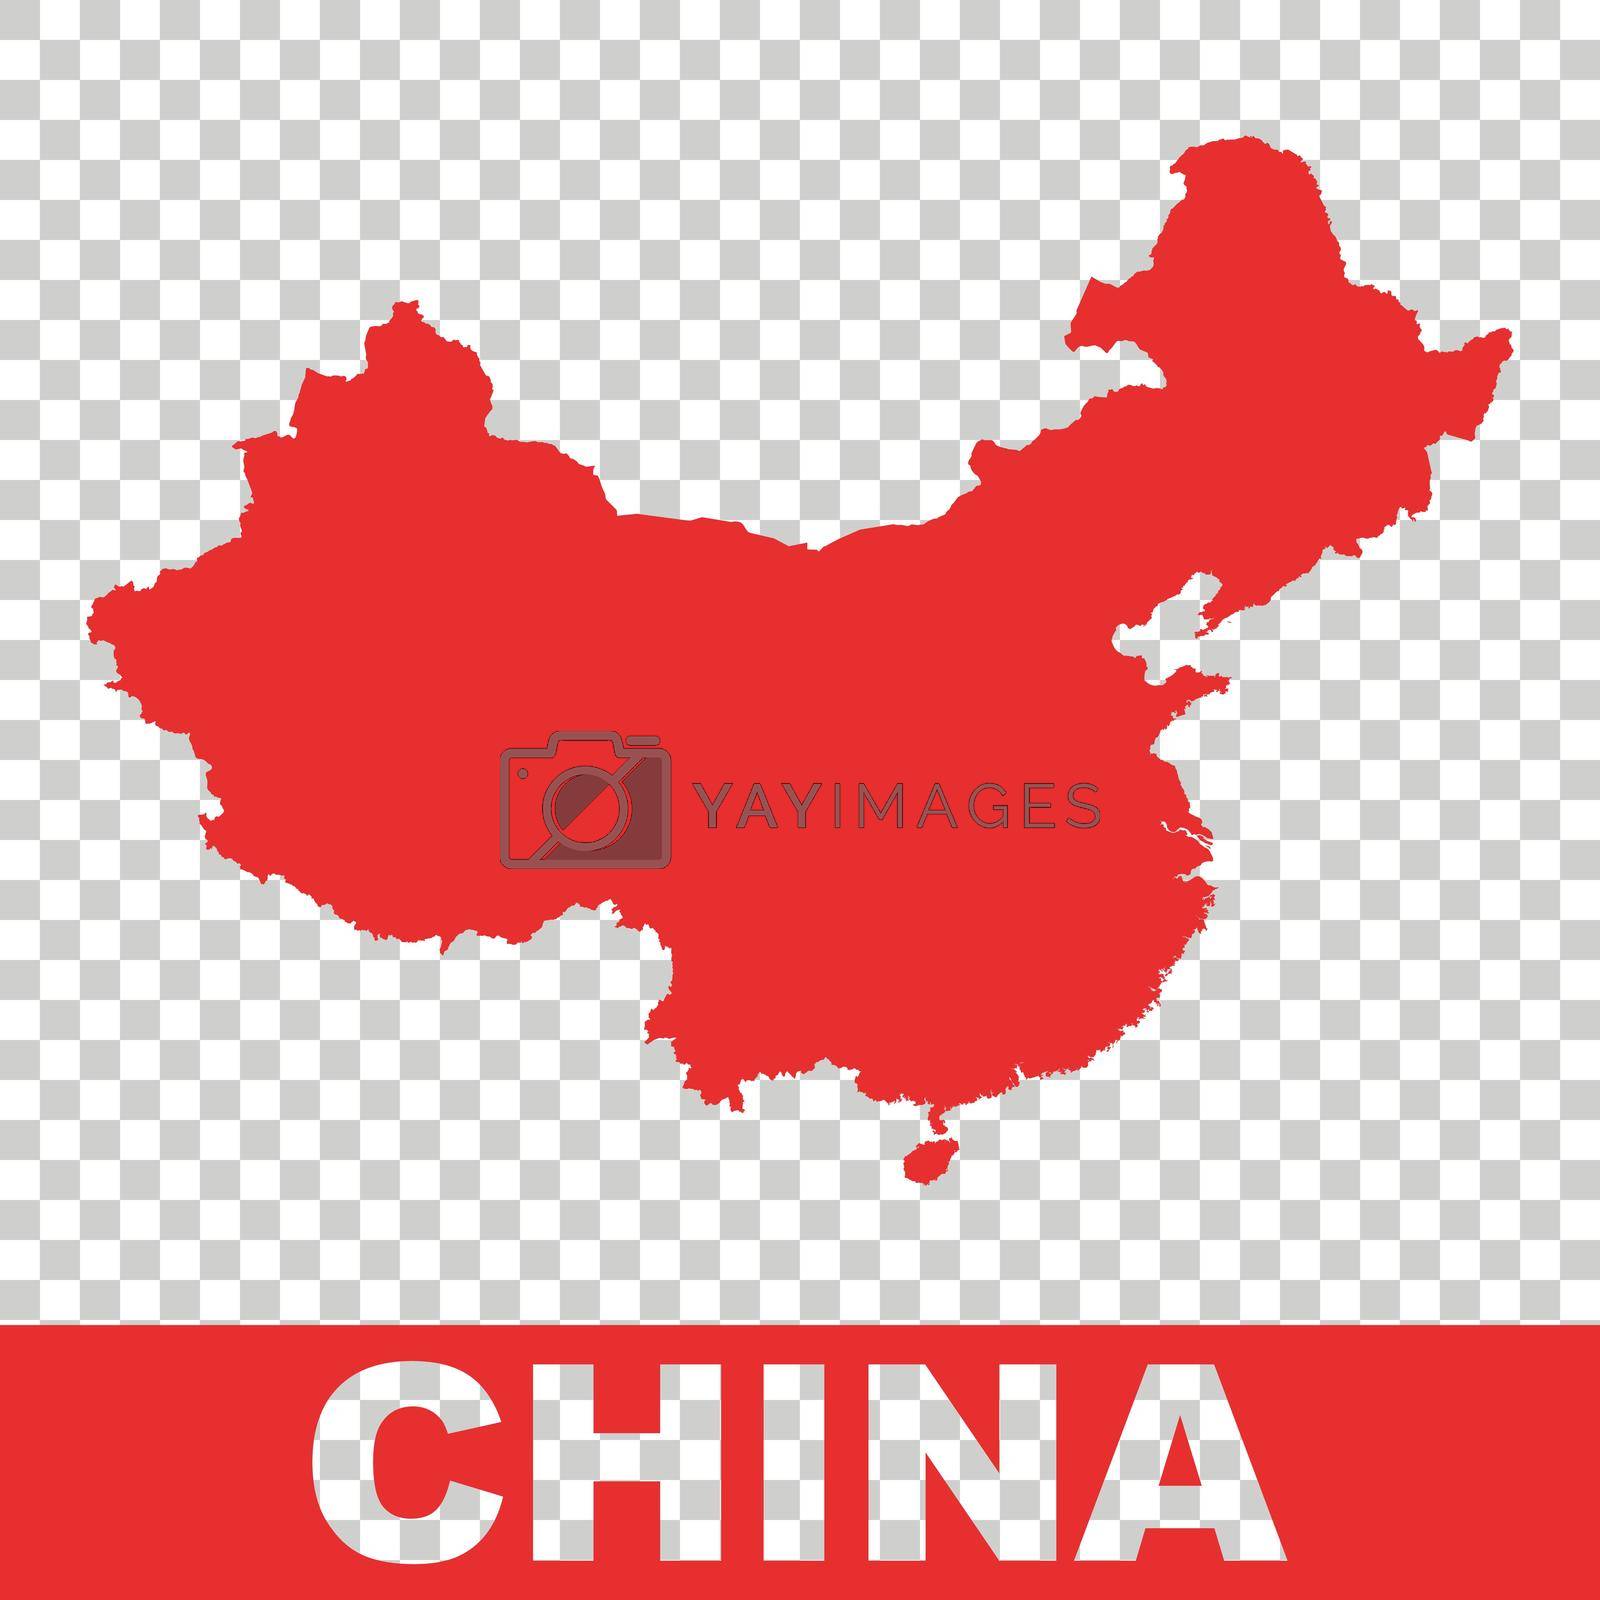 Royalty free image of China map. Colorful red vector illustration on isolated background by LysenkoA